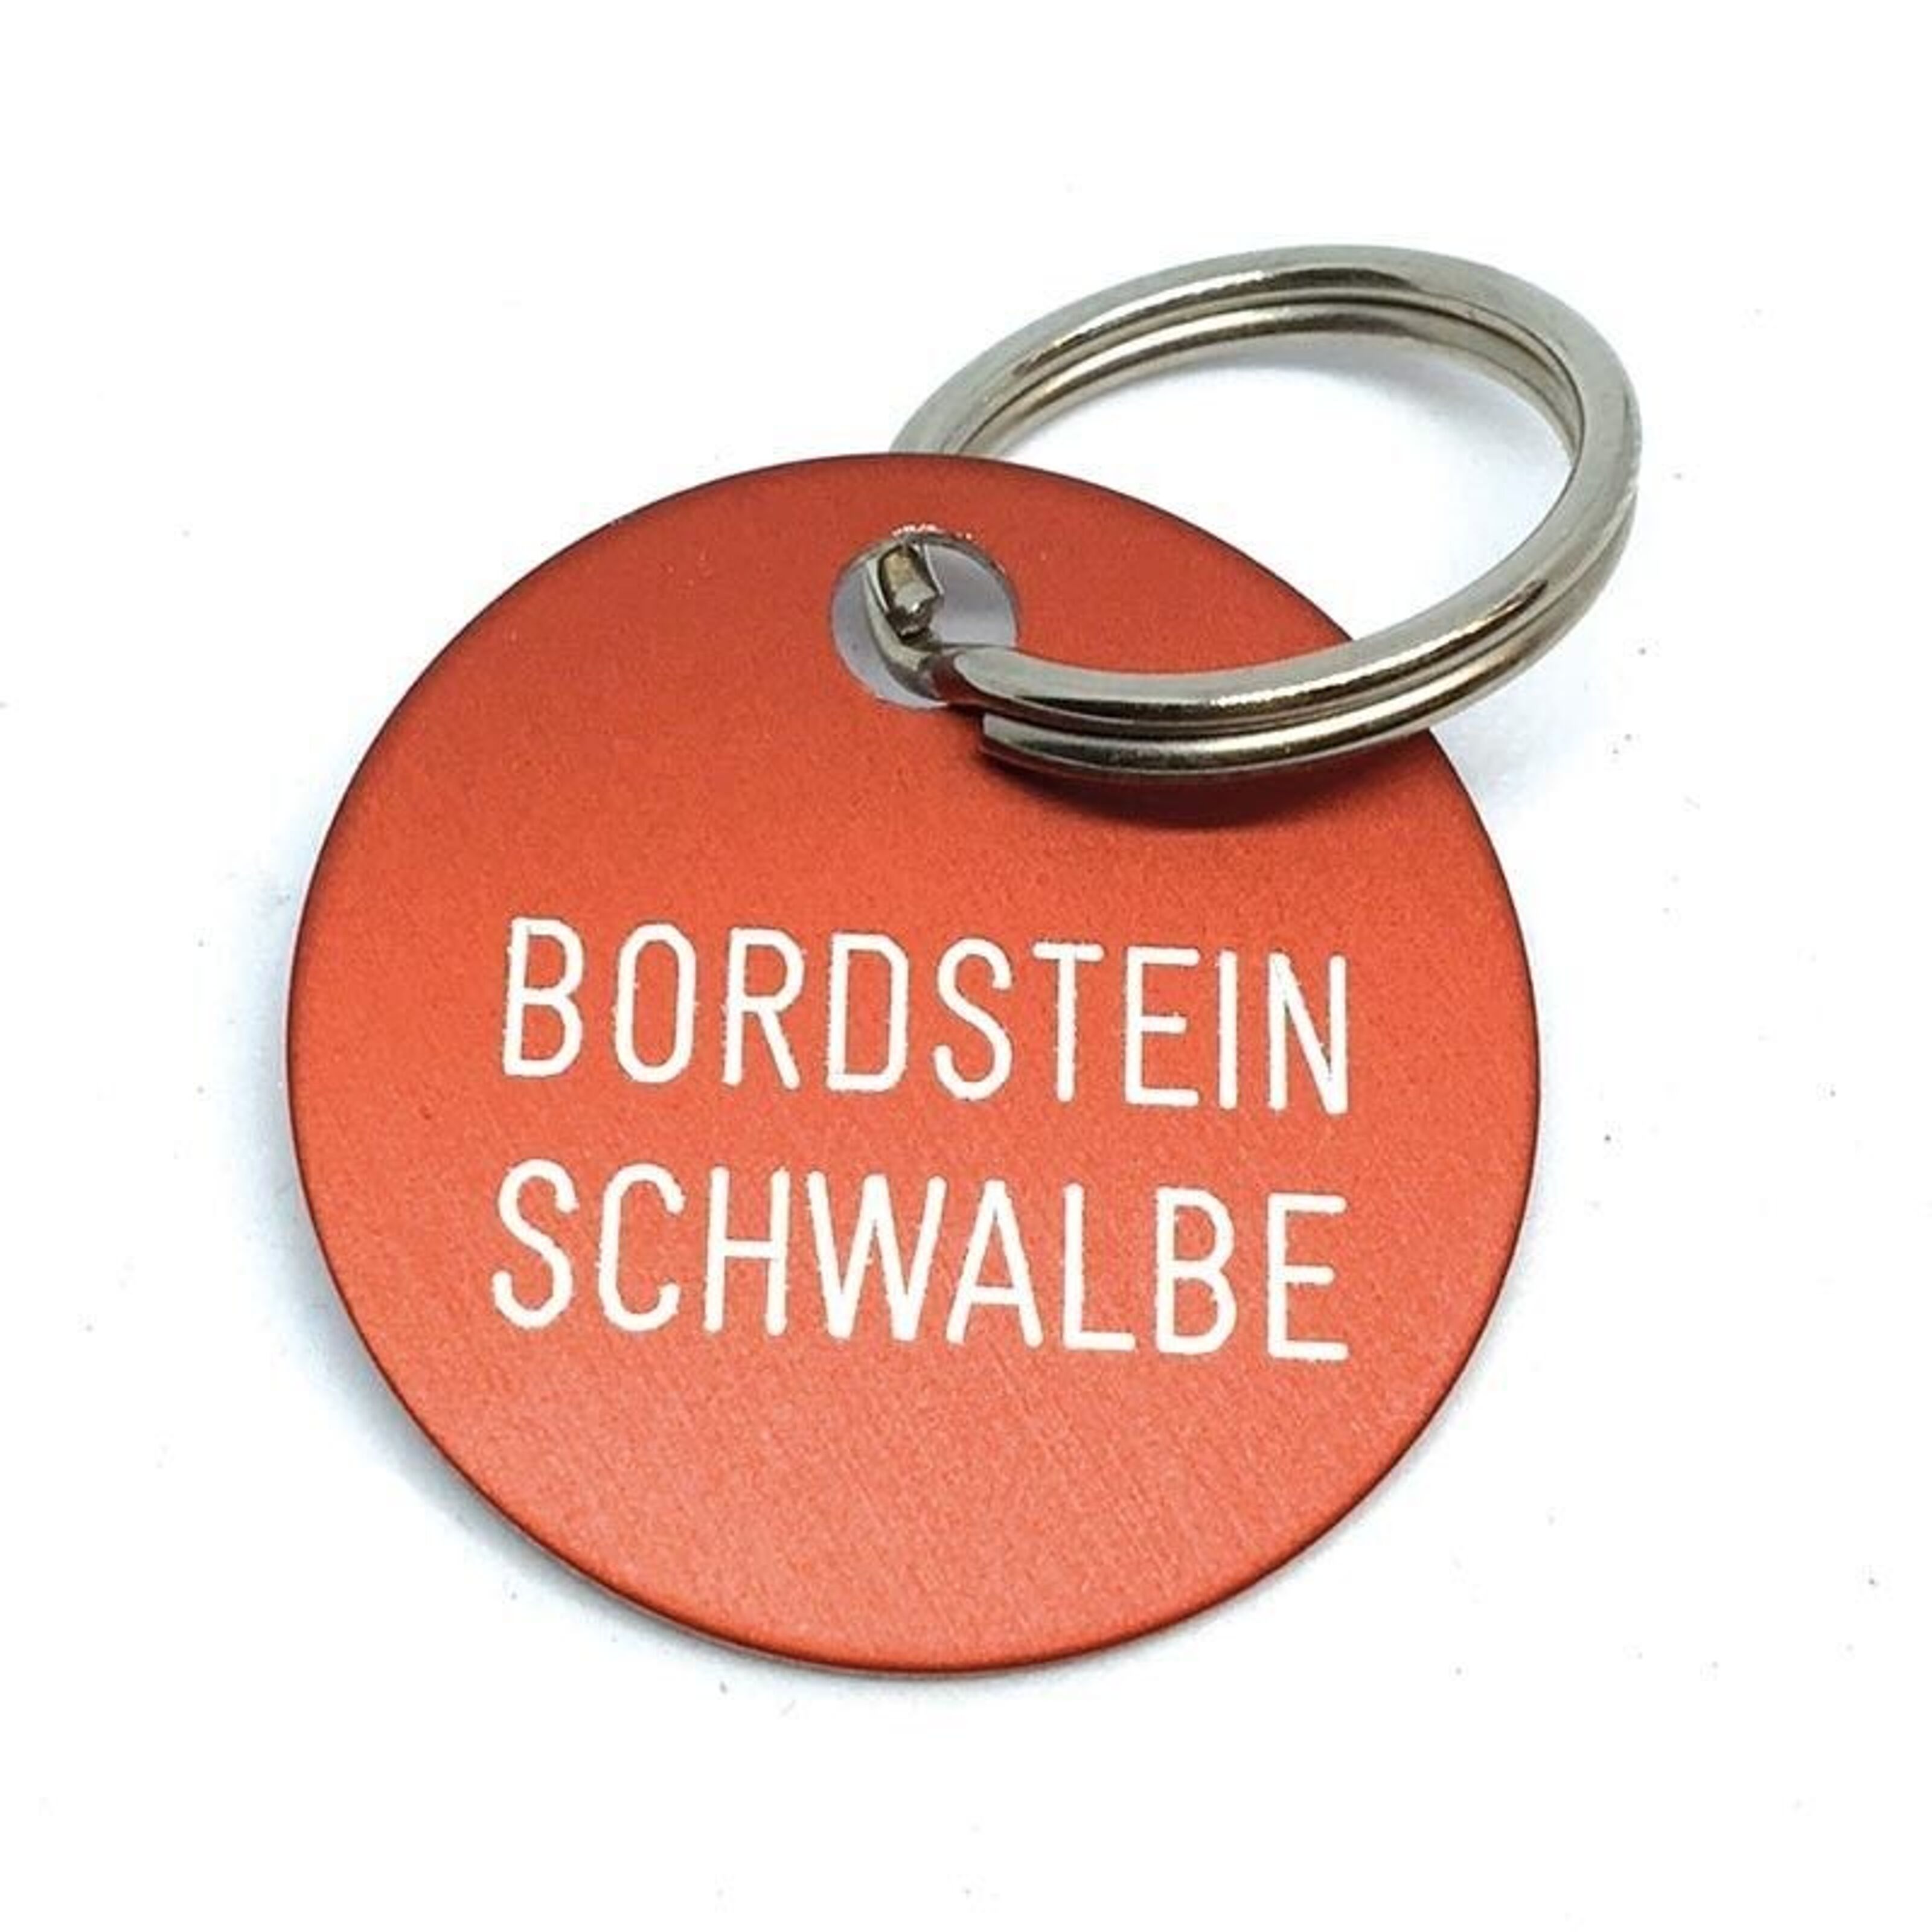 Swallow” design Keychain and Buy items wholesale “Curbstone Gift